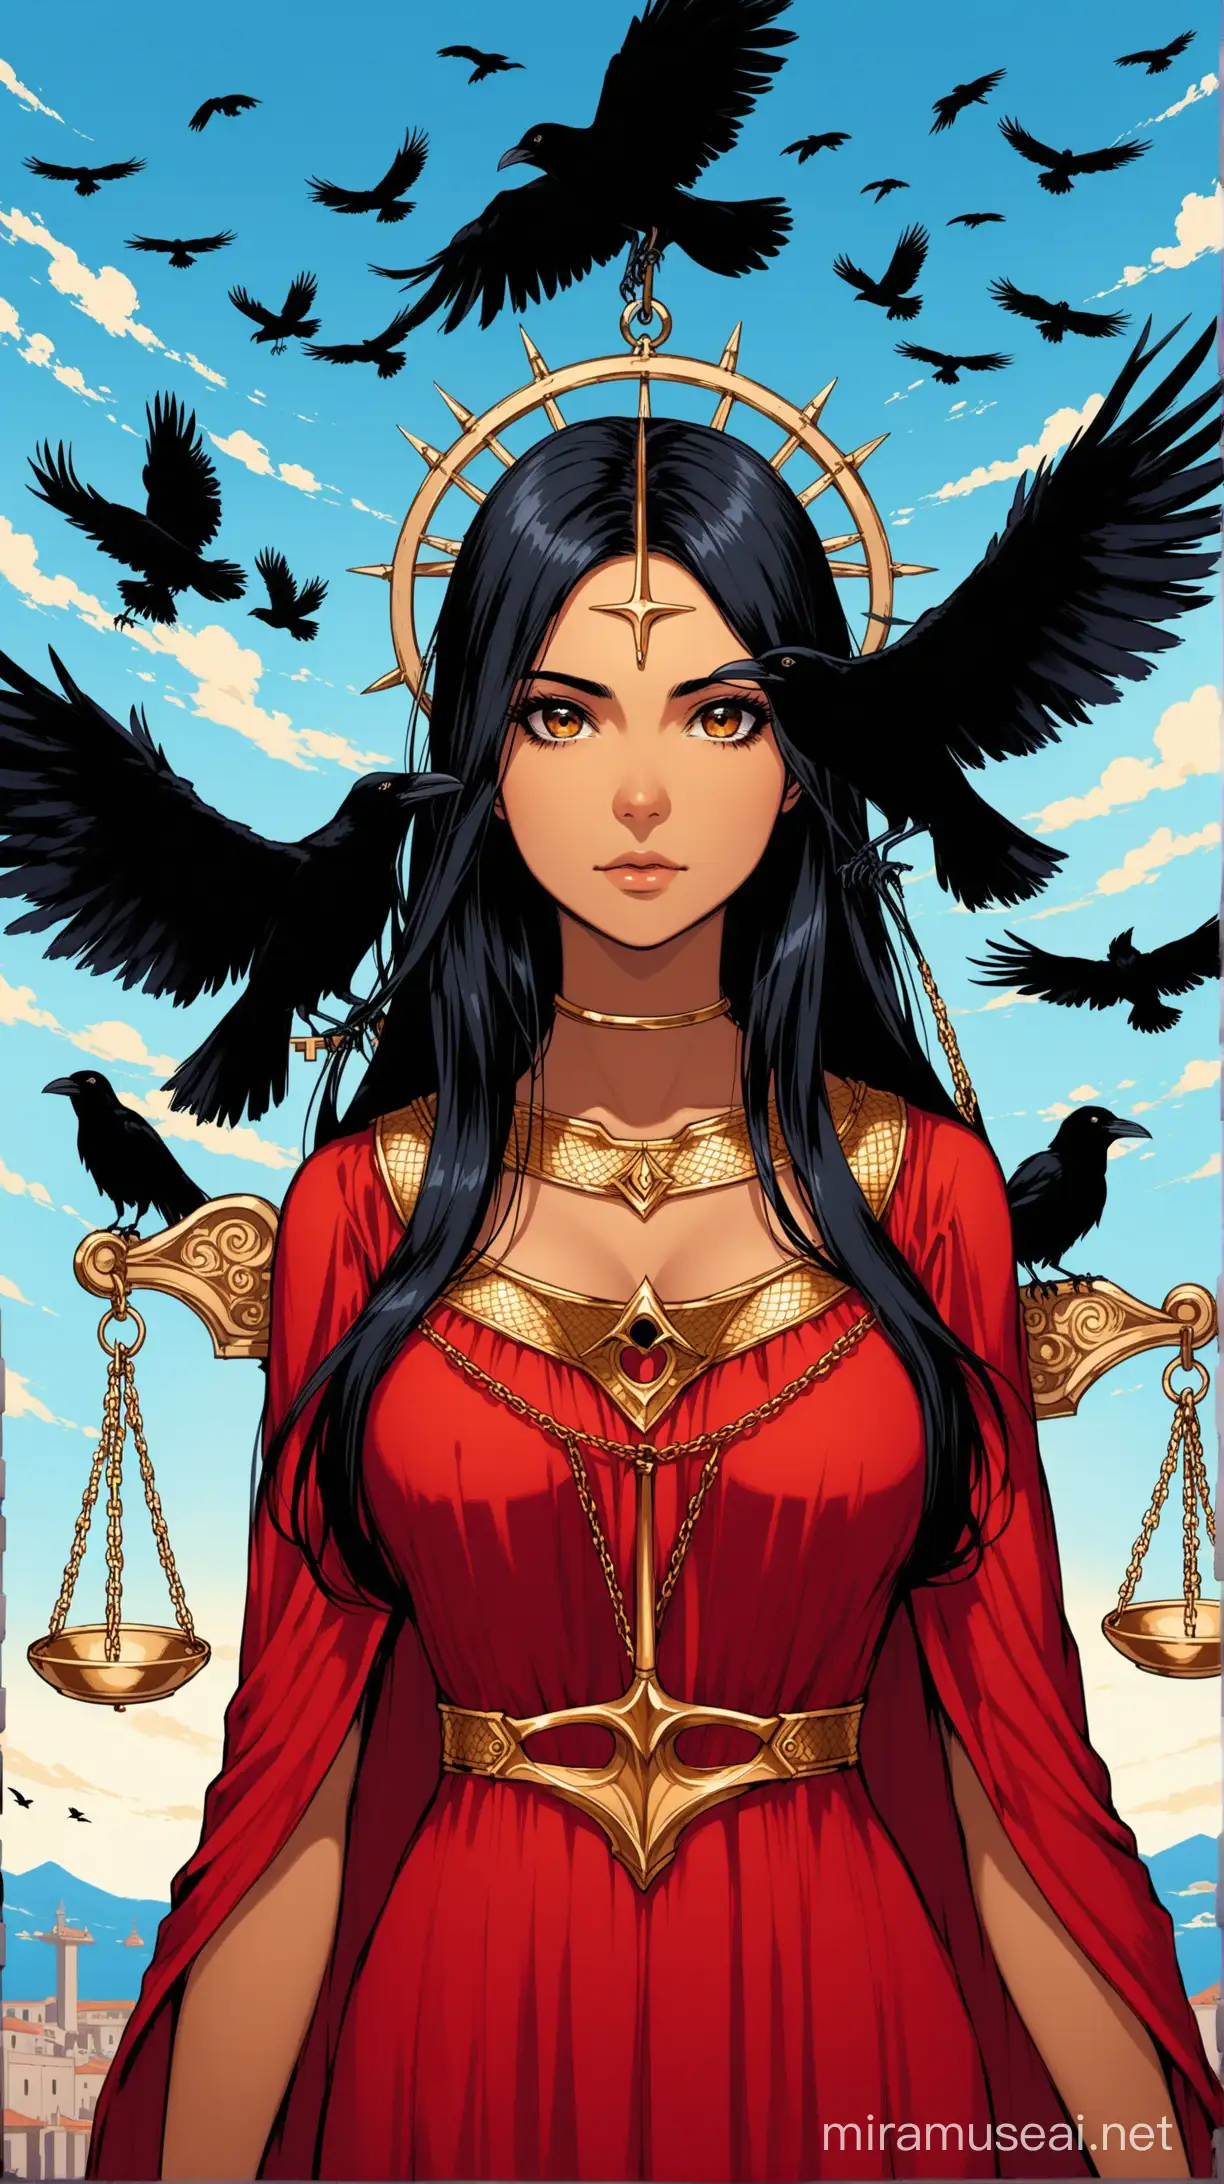 Latin Woman Contemplating Justice Symbolic Scales and Ethical Dilemmas